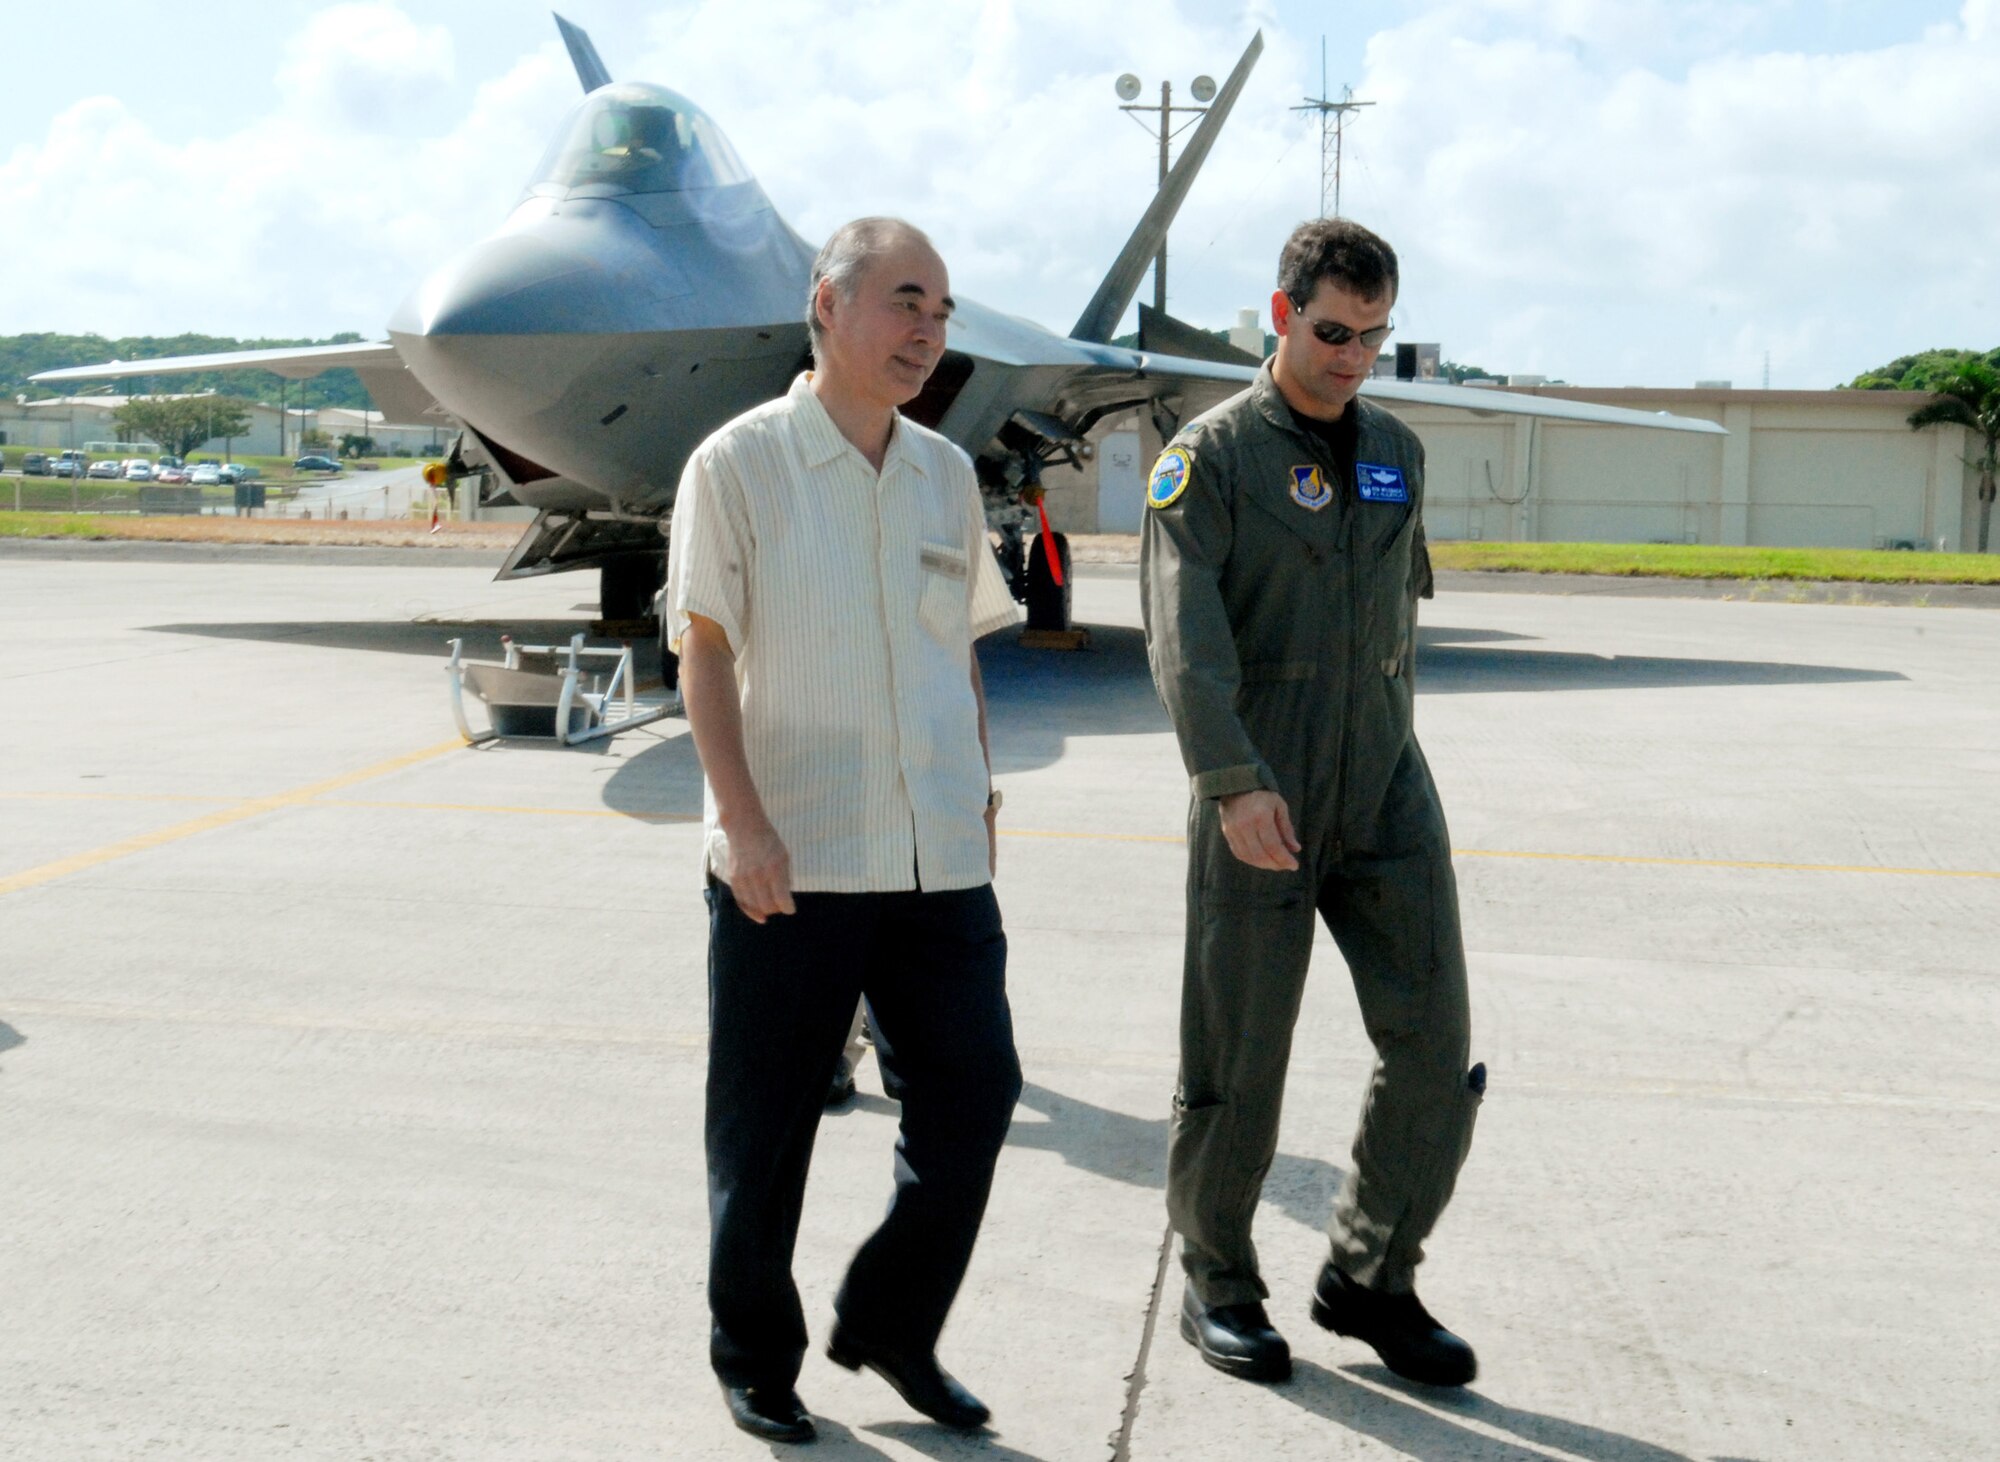 Japanese Ambassador, Sumio Tarui, receives a tour of an F-22 Raptor by Col. Kenneth Wilsbach, 18th Wing commander, during a visit to Kadena Air Base, July 31.
(U.S. Air Force photo/Tech. Sgt. Angelique Perez) 